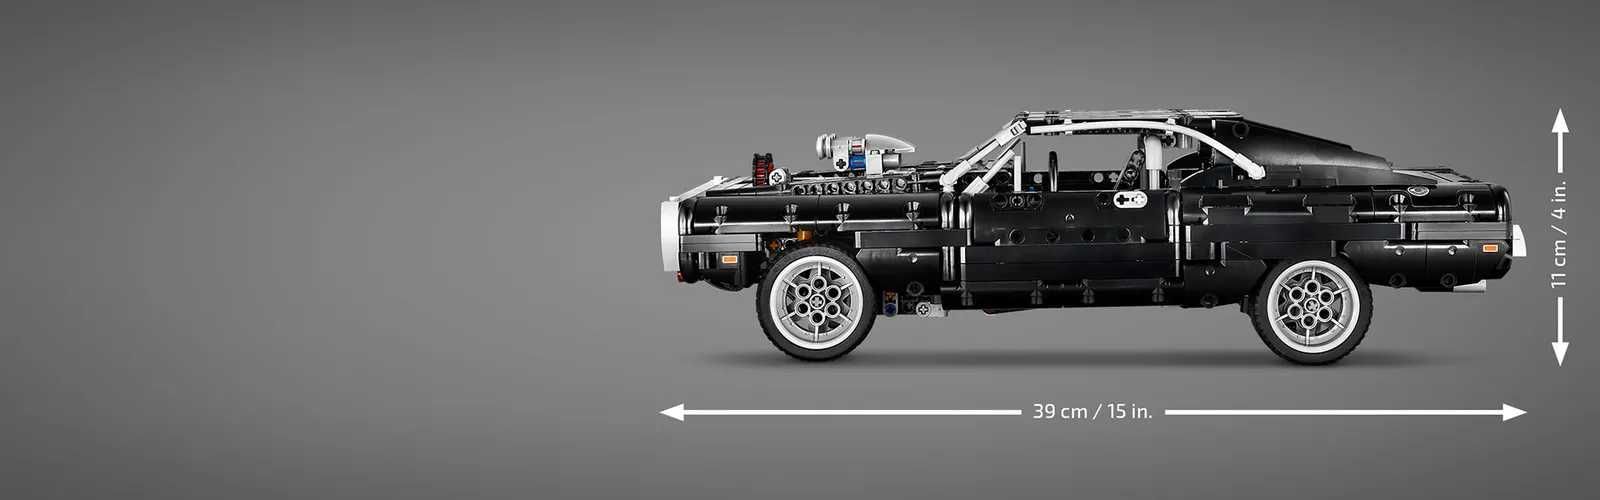 [NOWE] LEGO TECHNIC Dom's Dodge Charger 42111